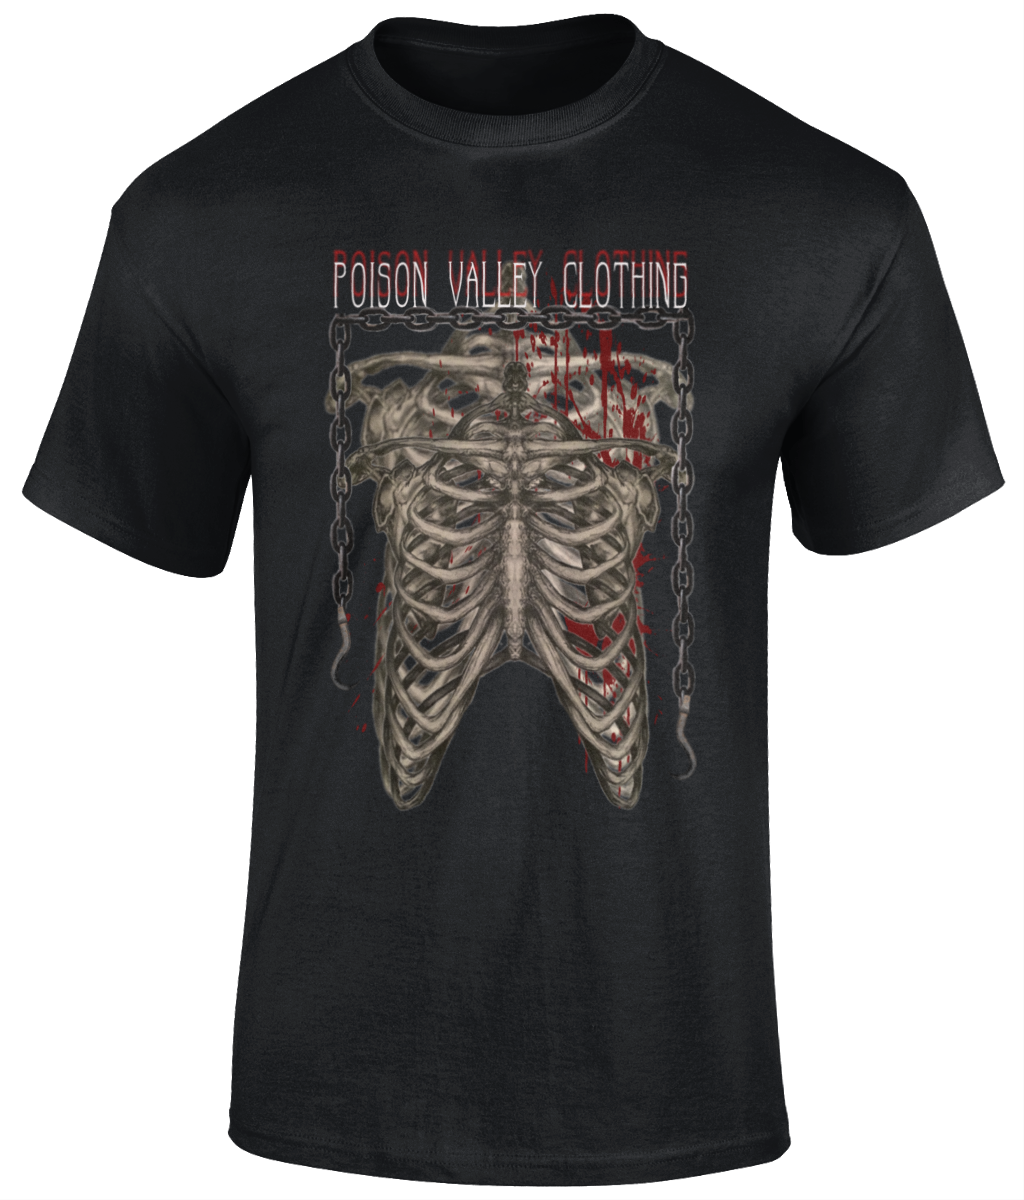 POISON VALLEY CLOTHING "RIBS AND CHAINS"  Original artwork by David Pankhurst  Material: 100% cotton.*  Seamless twin needle collar. Taped neck and shoulders. Tubular body. Twin needle sleeves and hem. Black Sizes small to 5XL